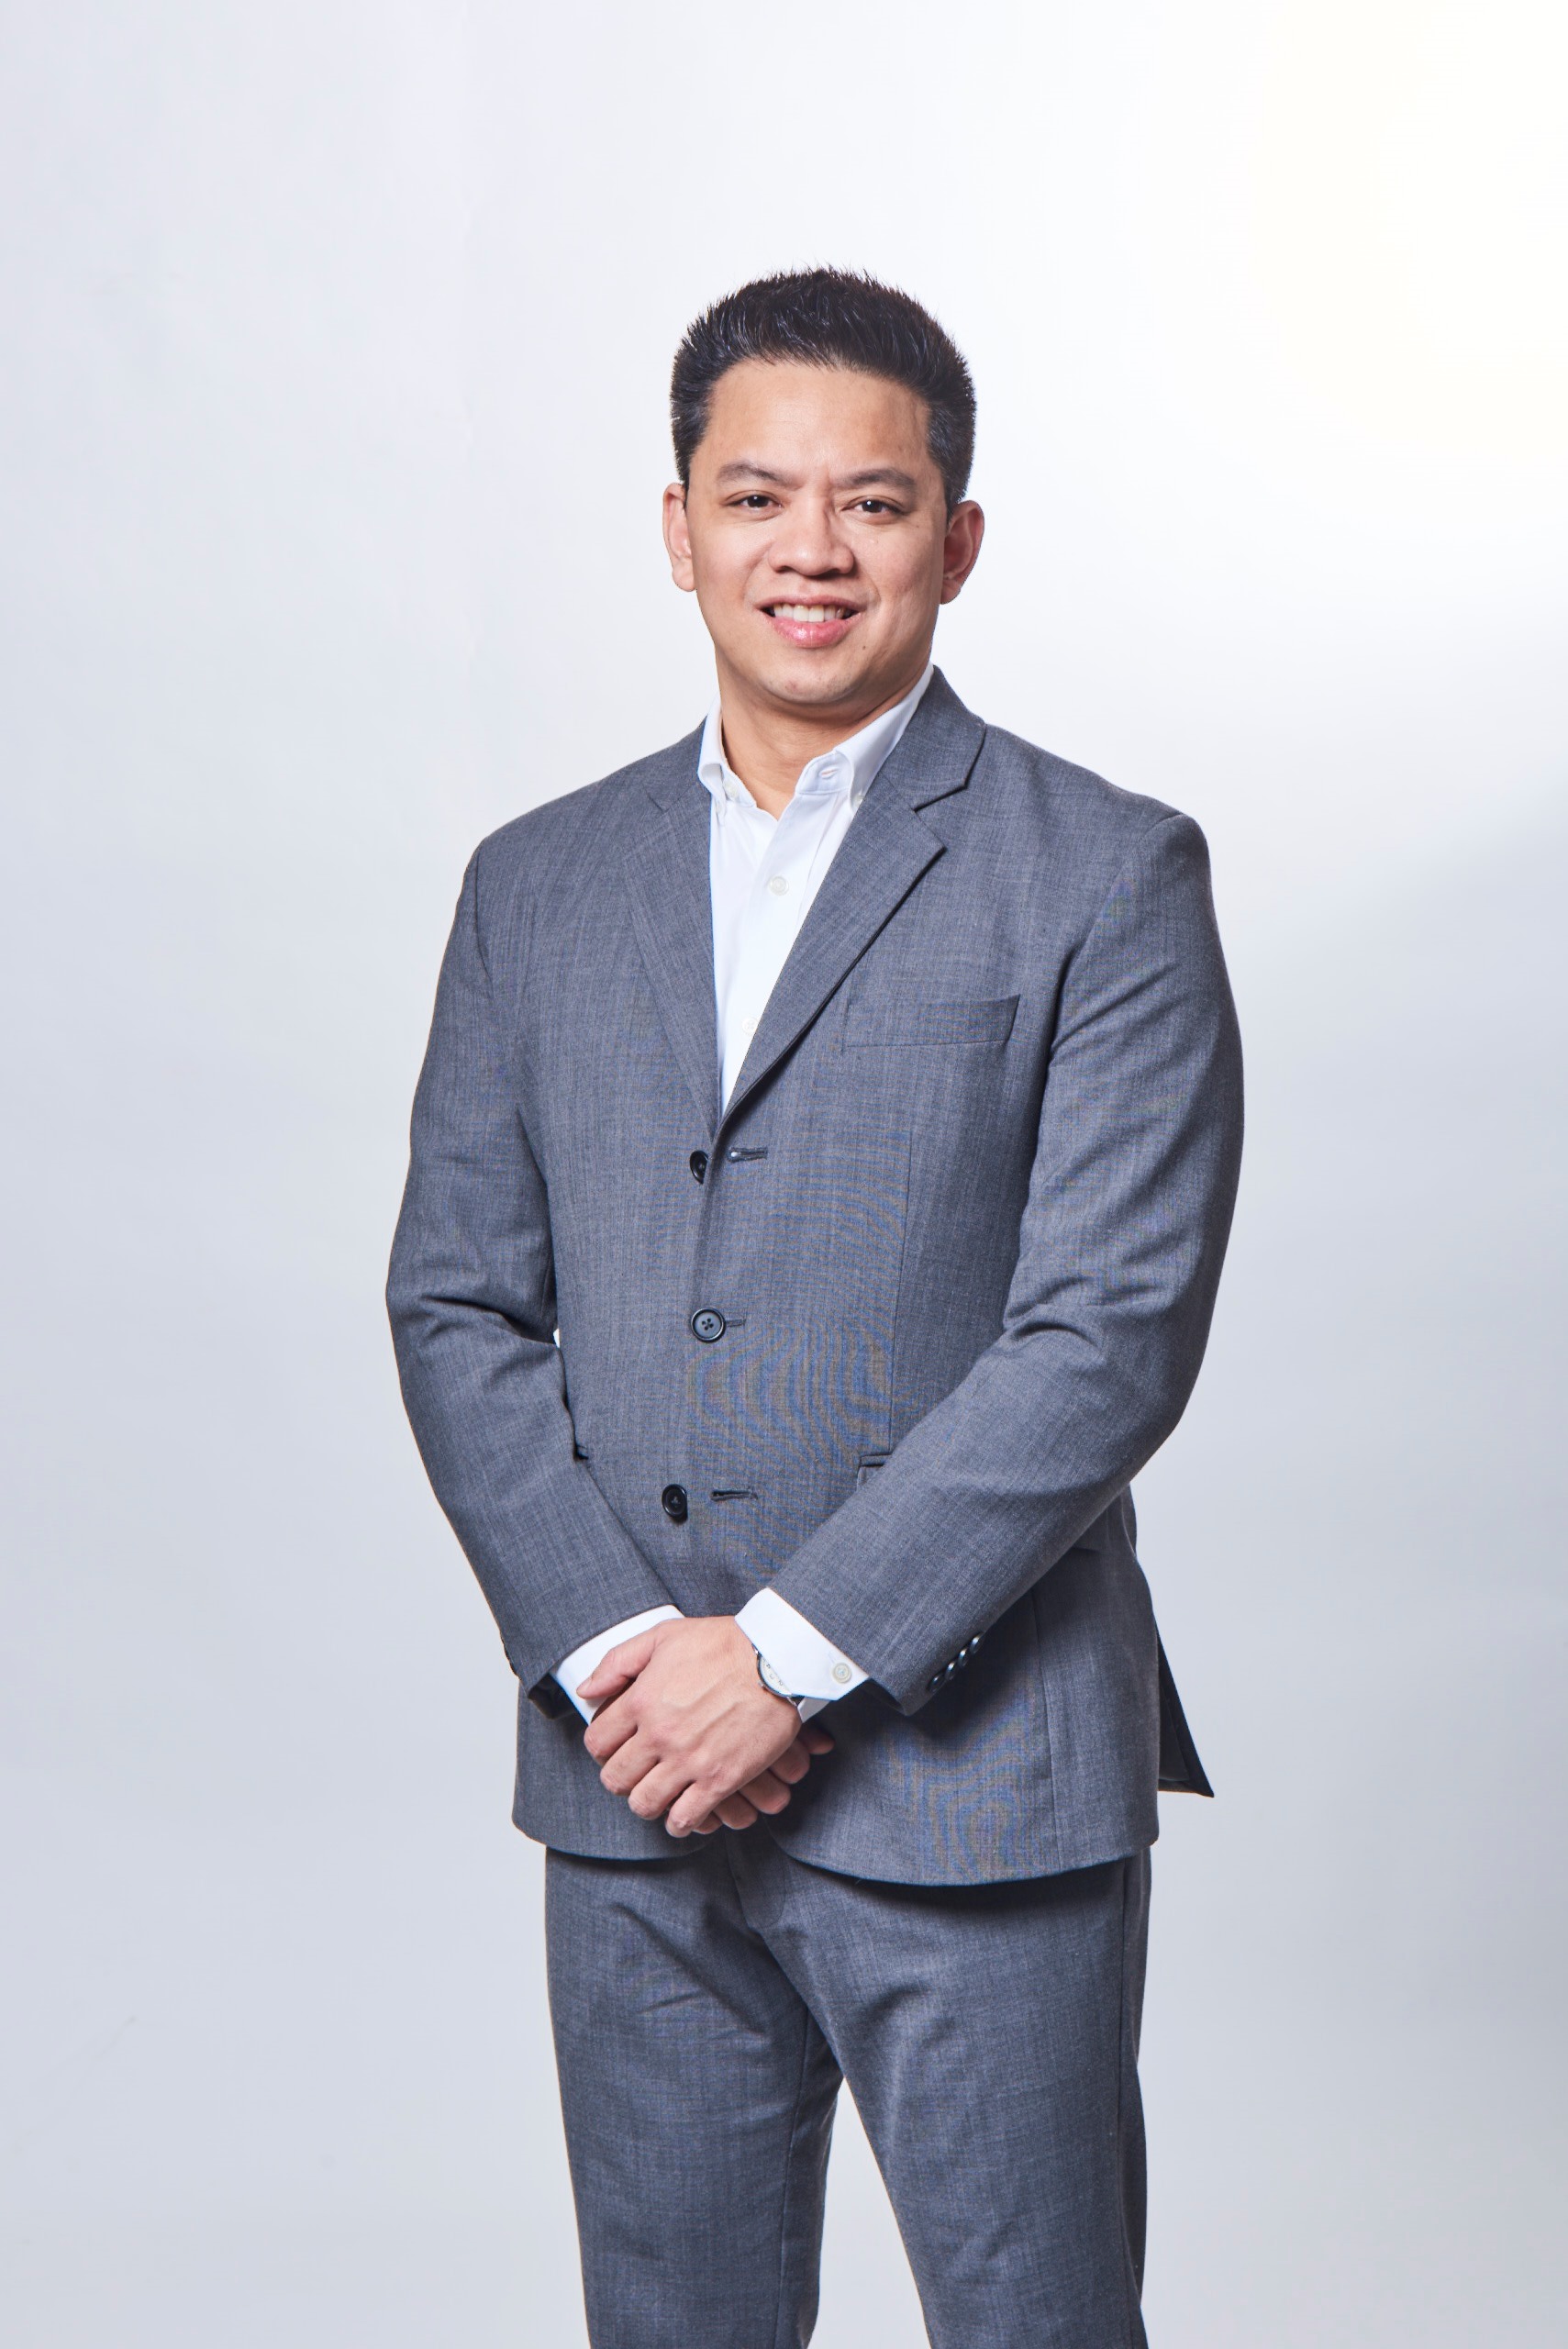 Former Lazada Chairman and chief executive officer (CEO) Ray Alimurung